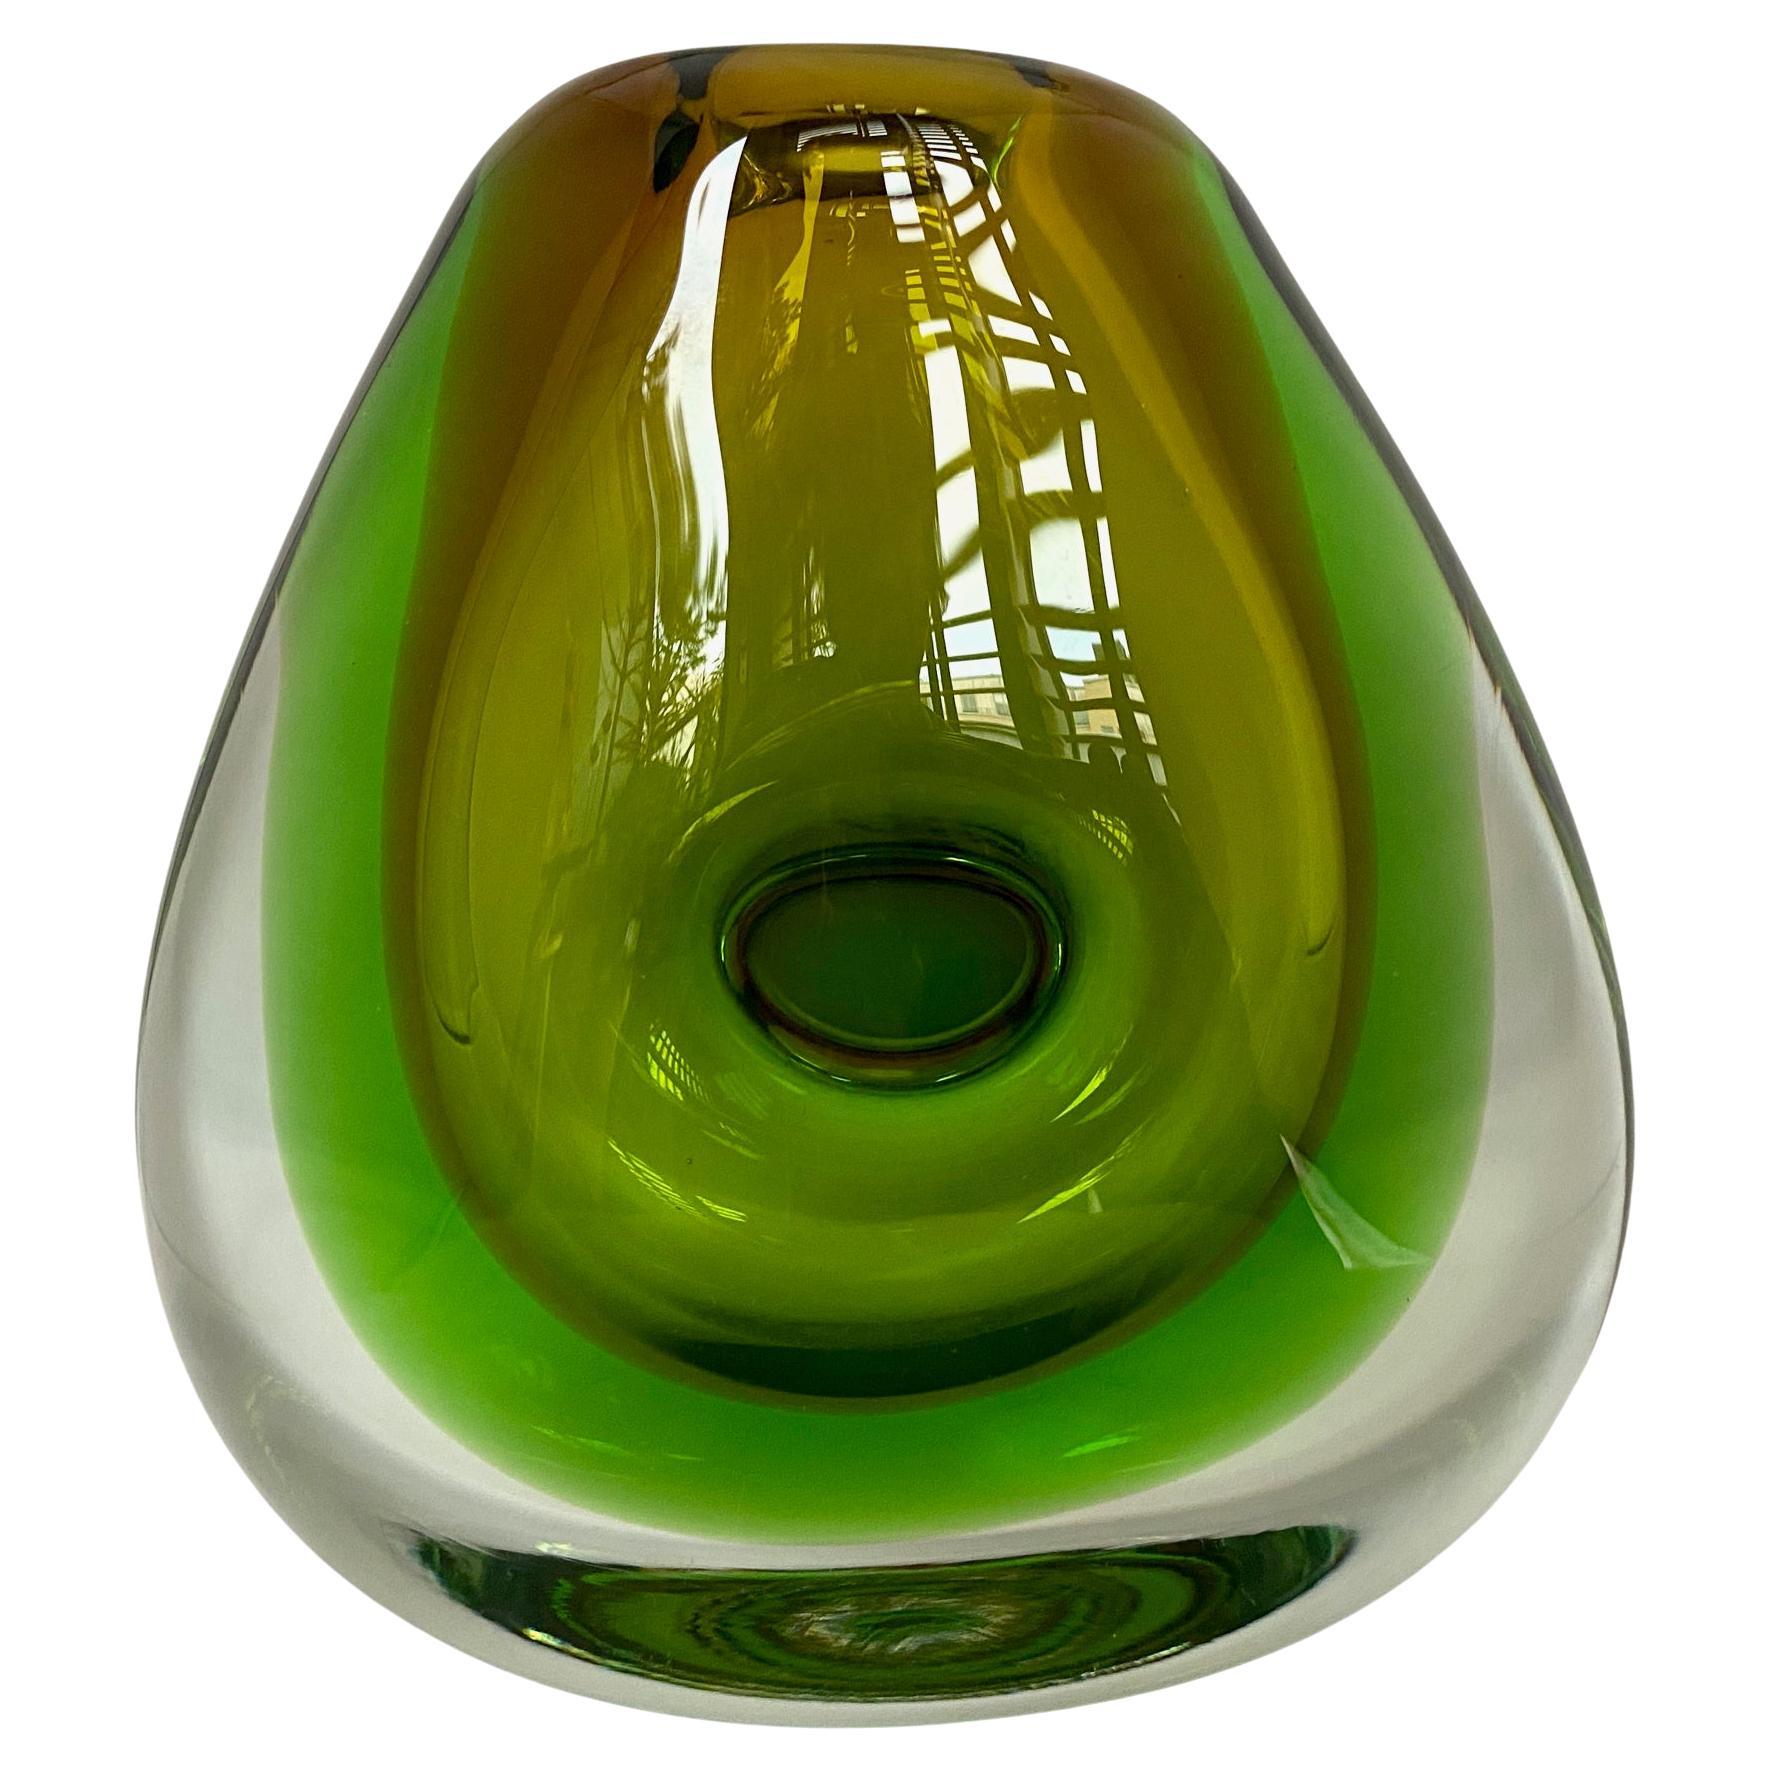 Heavy 1960's Green Bohemian Art Glass Vase, by Vladimir Mika for Moser In Good Condition For Sale In London, GB